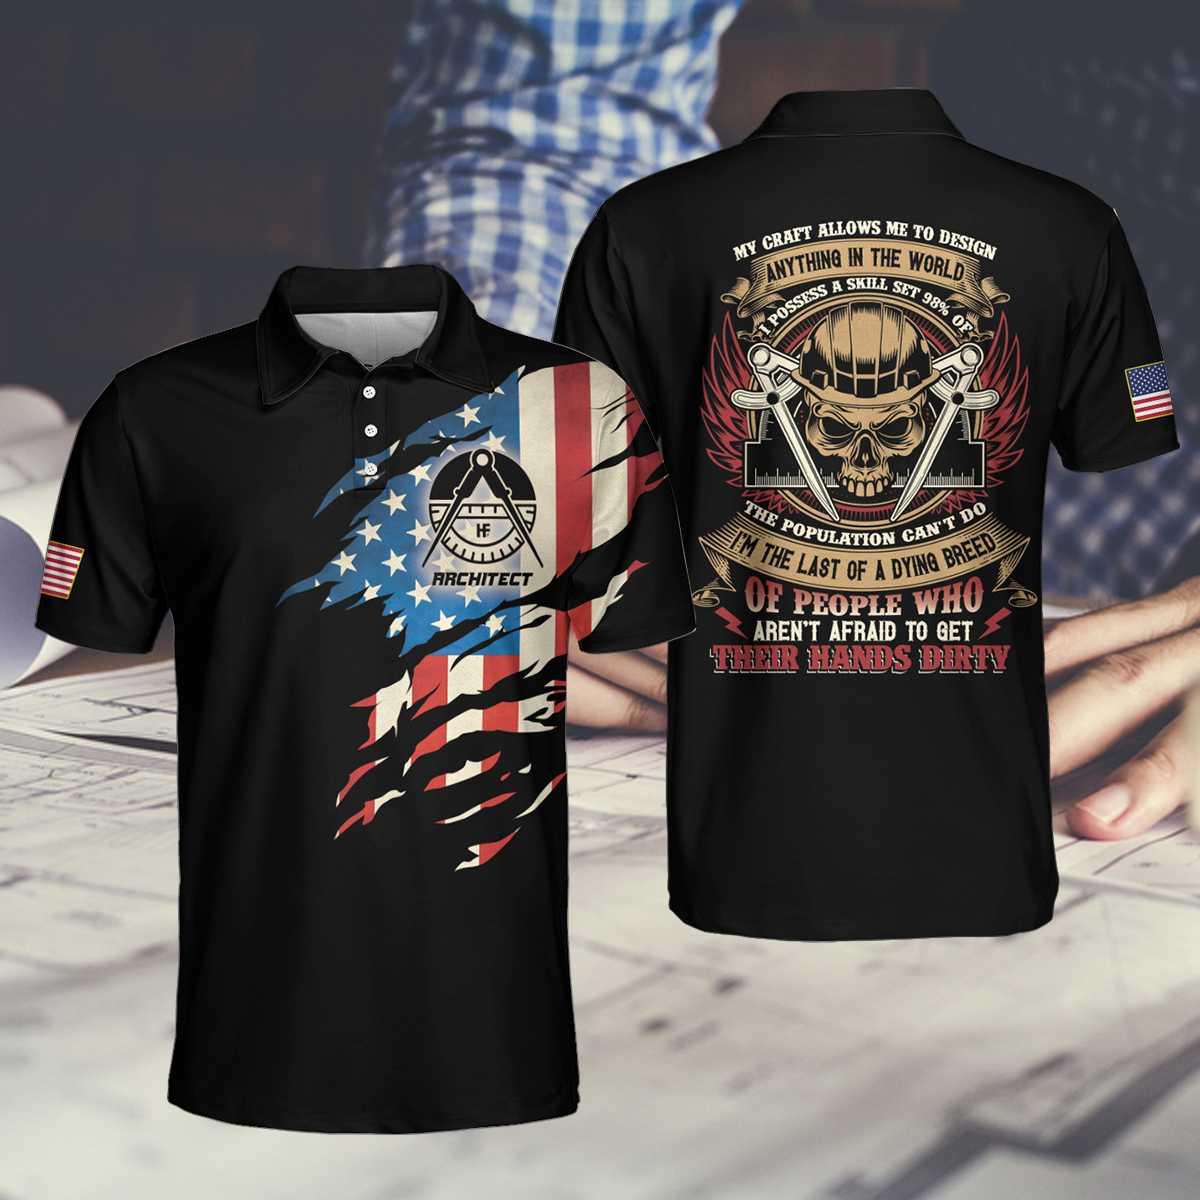 Architect Men Polo Shirt, American Flag Skull, My Craft Allows Me To Design Anything Polo Shirt, Crazy Architect Shirt - Gift For Men, Architect - Amzanimalsgift